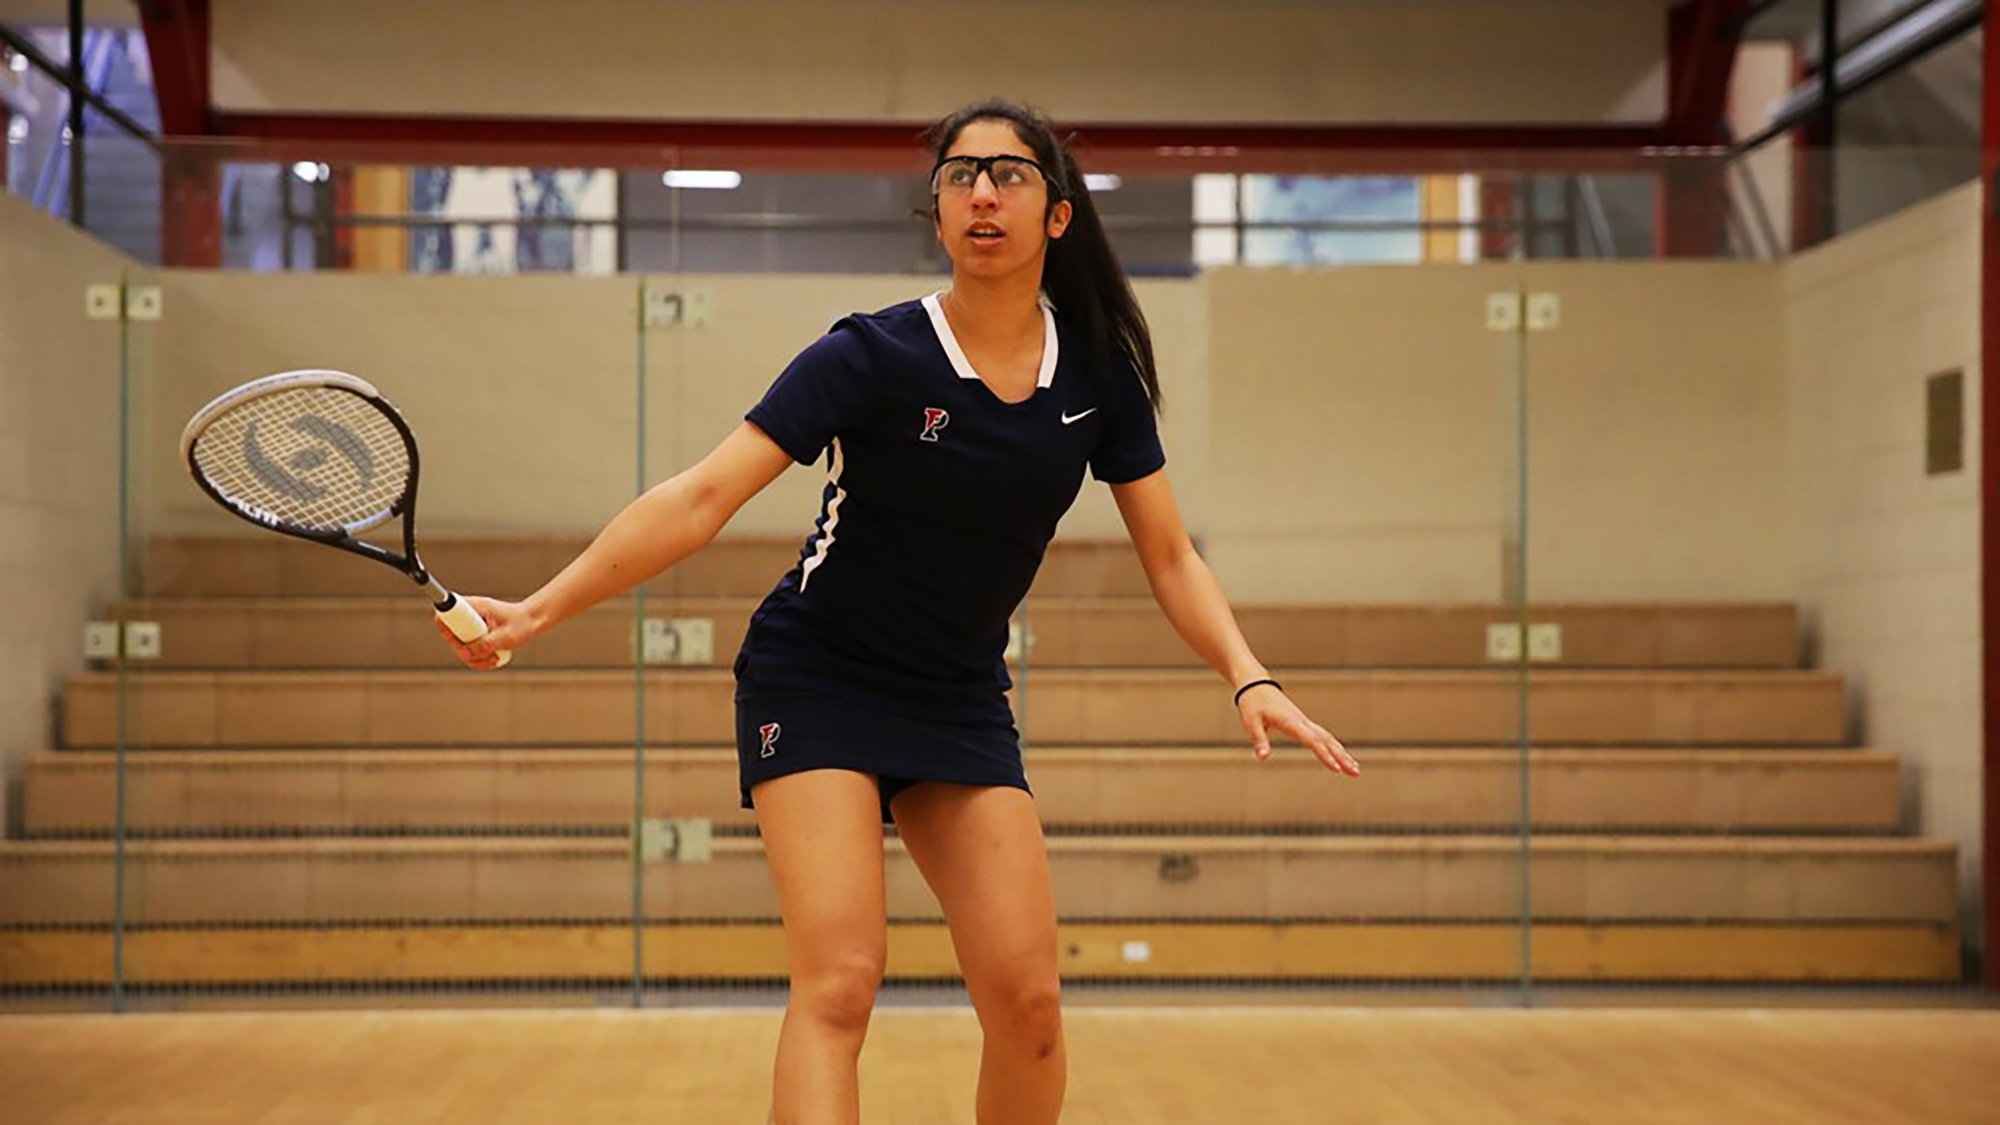 Reeham Sedky prepares to the hit the ball during a squash match.